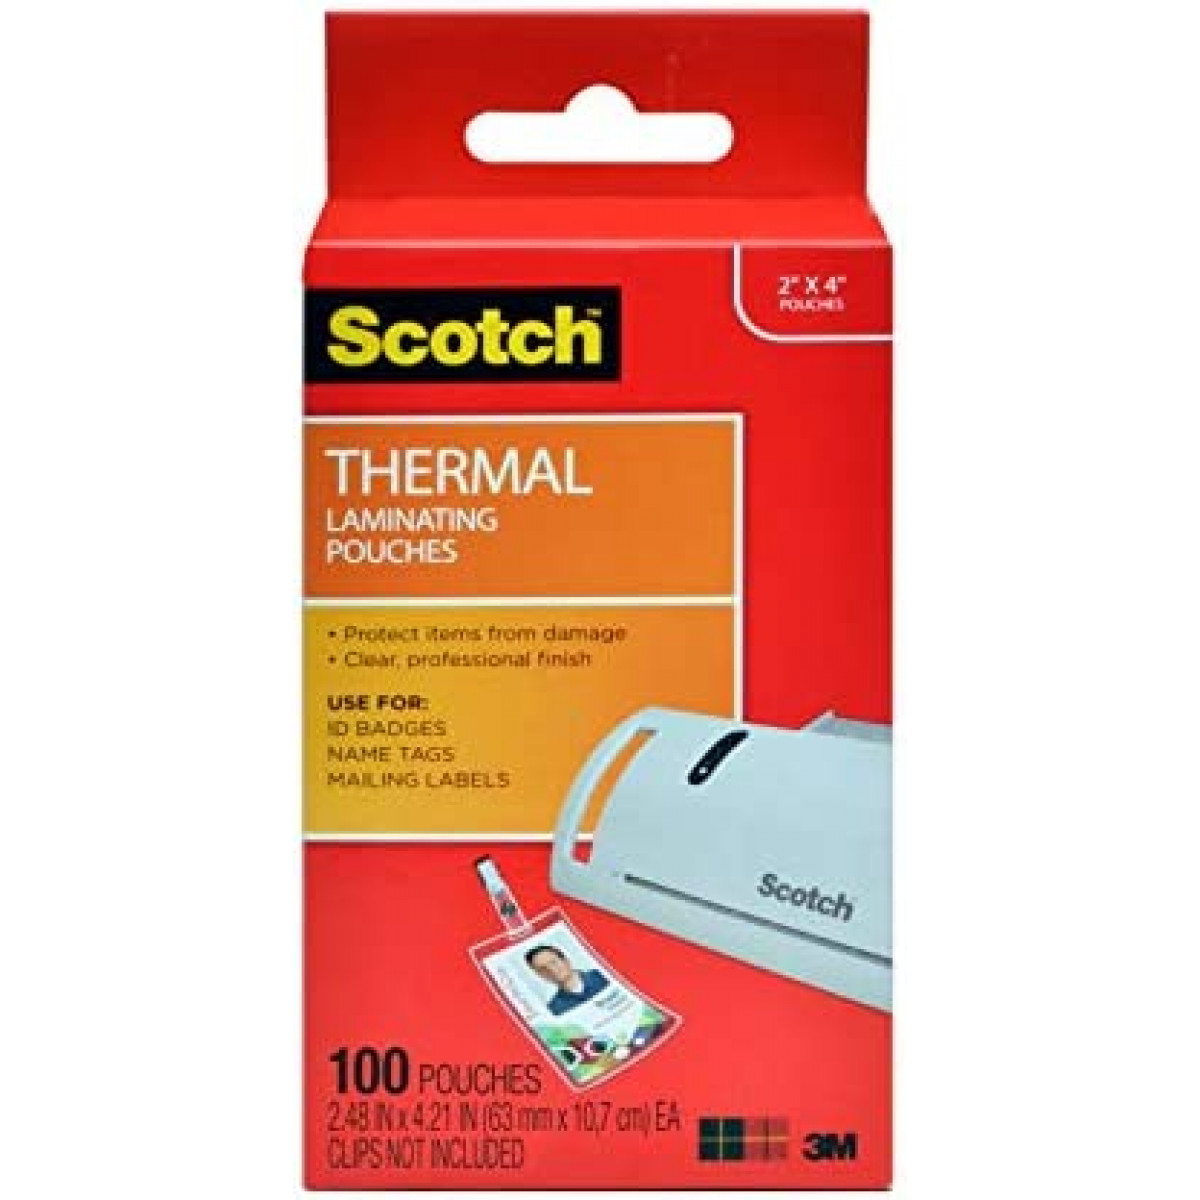 Scotch Thermal Laminating Pouches 5 Mil Thick For 